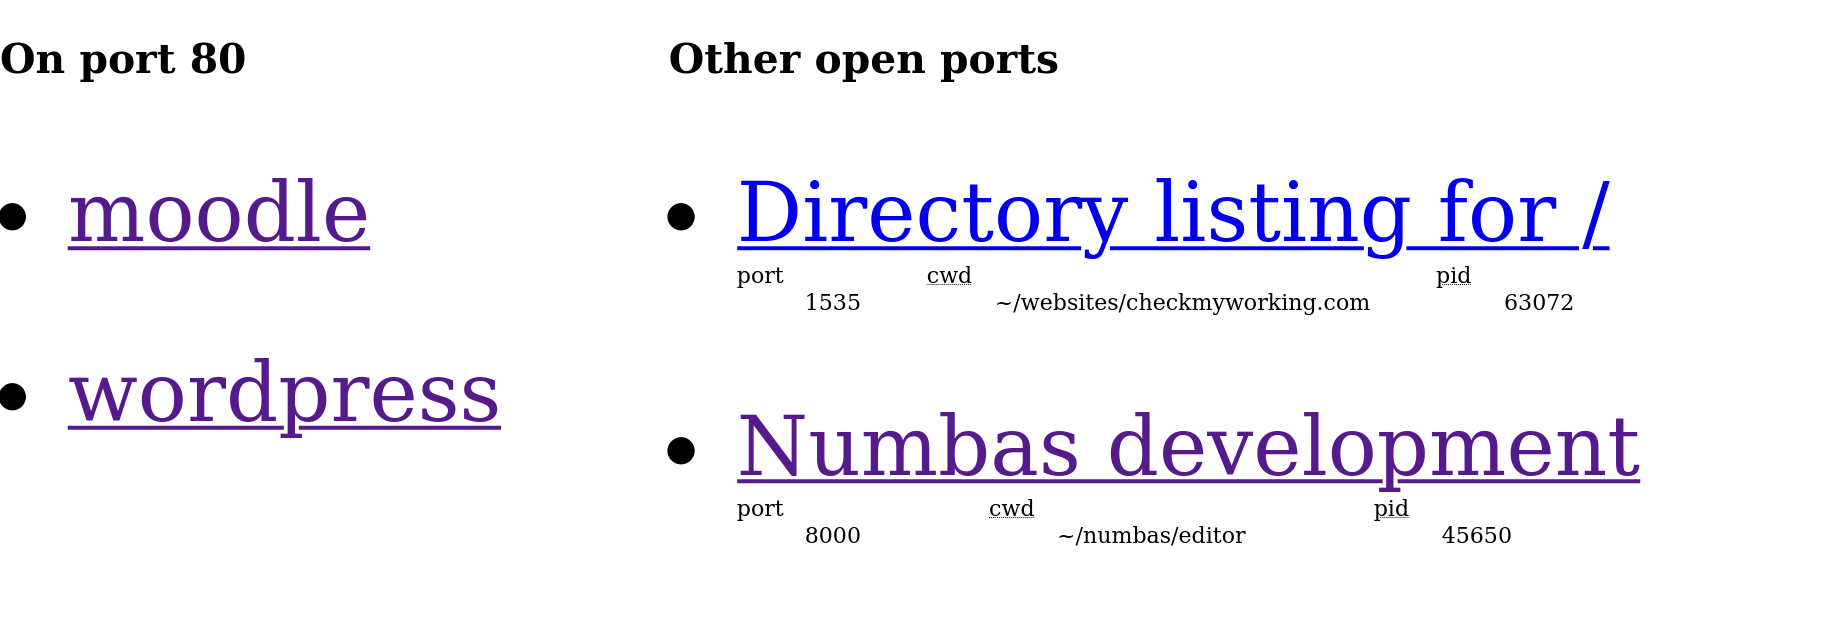 A webpage with two columns. The first lists "moodle" and "wordpress" under the heading "On port 80". The other has the header "Other open ports" and there are two list items. The first reads, "Directory listing for /", with port: 1535, cwd: ~/websites/checkmyworking.com, pid: 63072. The second reads, "Numbas development server", port: 8000, cwd: ~/numbas/editor, pid: 45650.